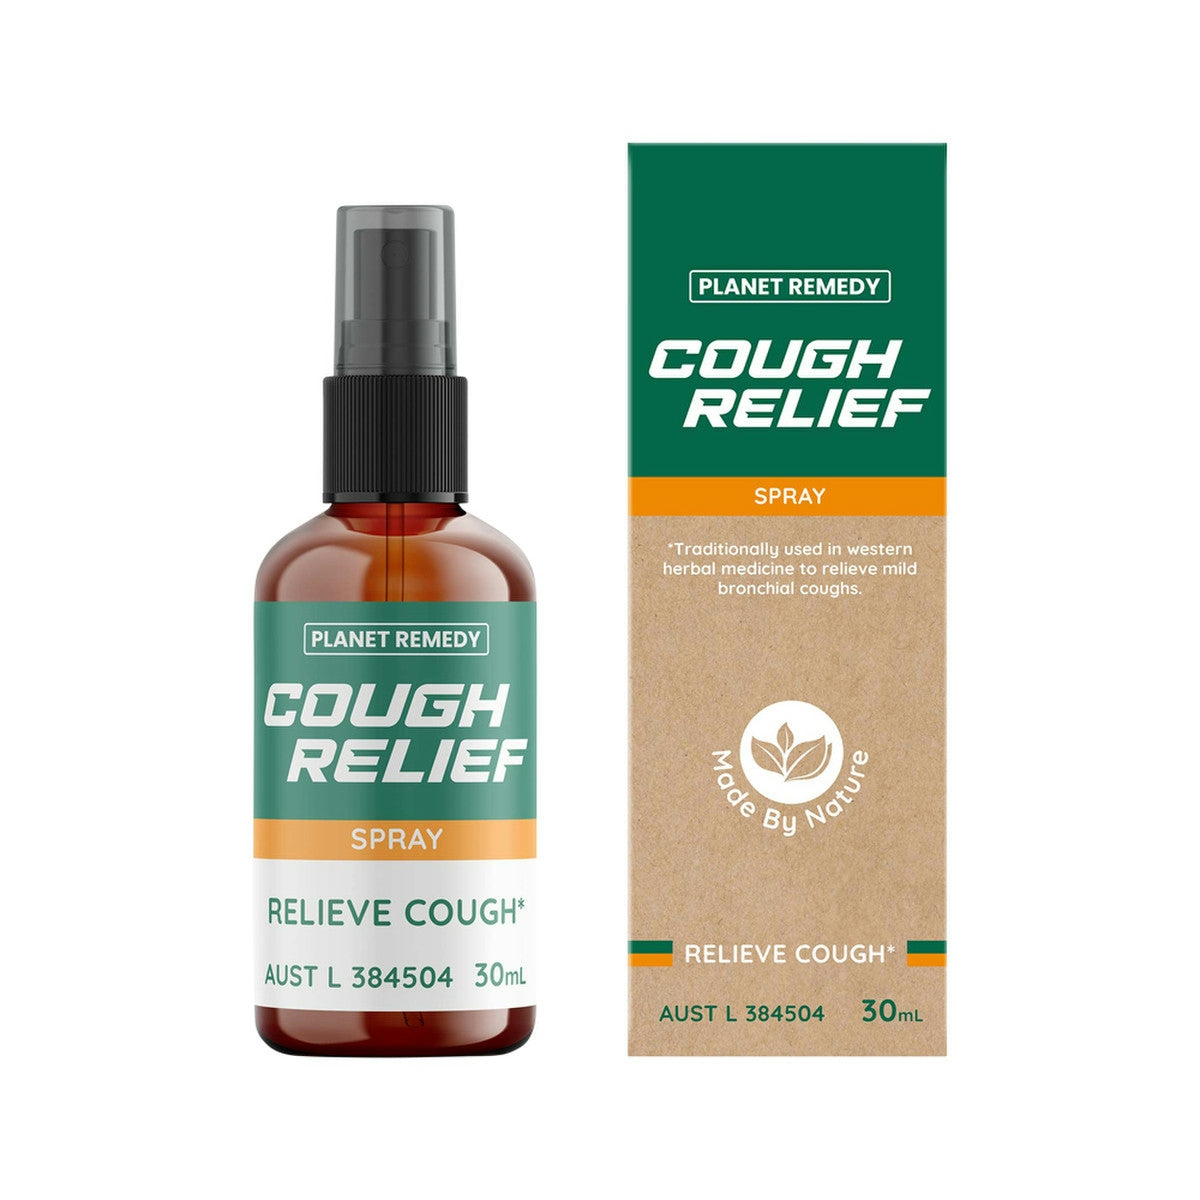 image of Planet Remedy Cough Relief Spray 30ml on white background